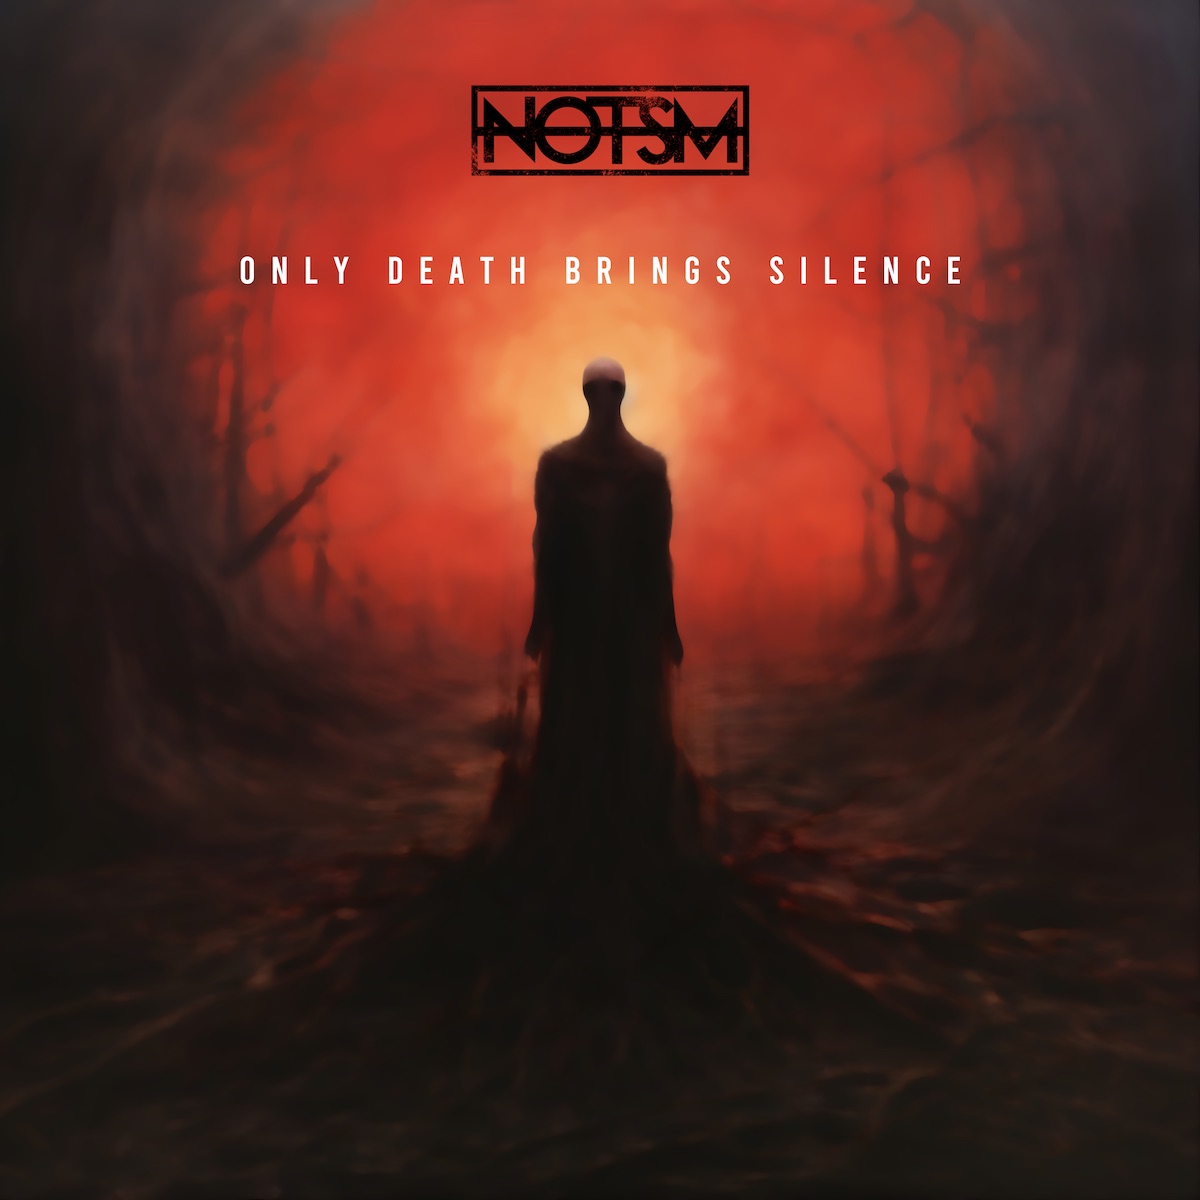 DEBUT ALBUM REVIEW: Only Death Brings Silence by NOTSM